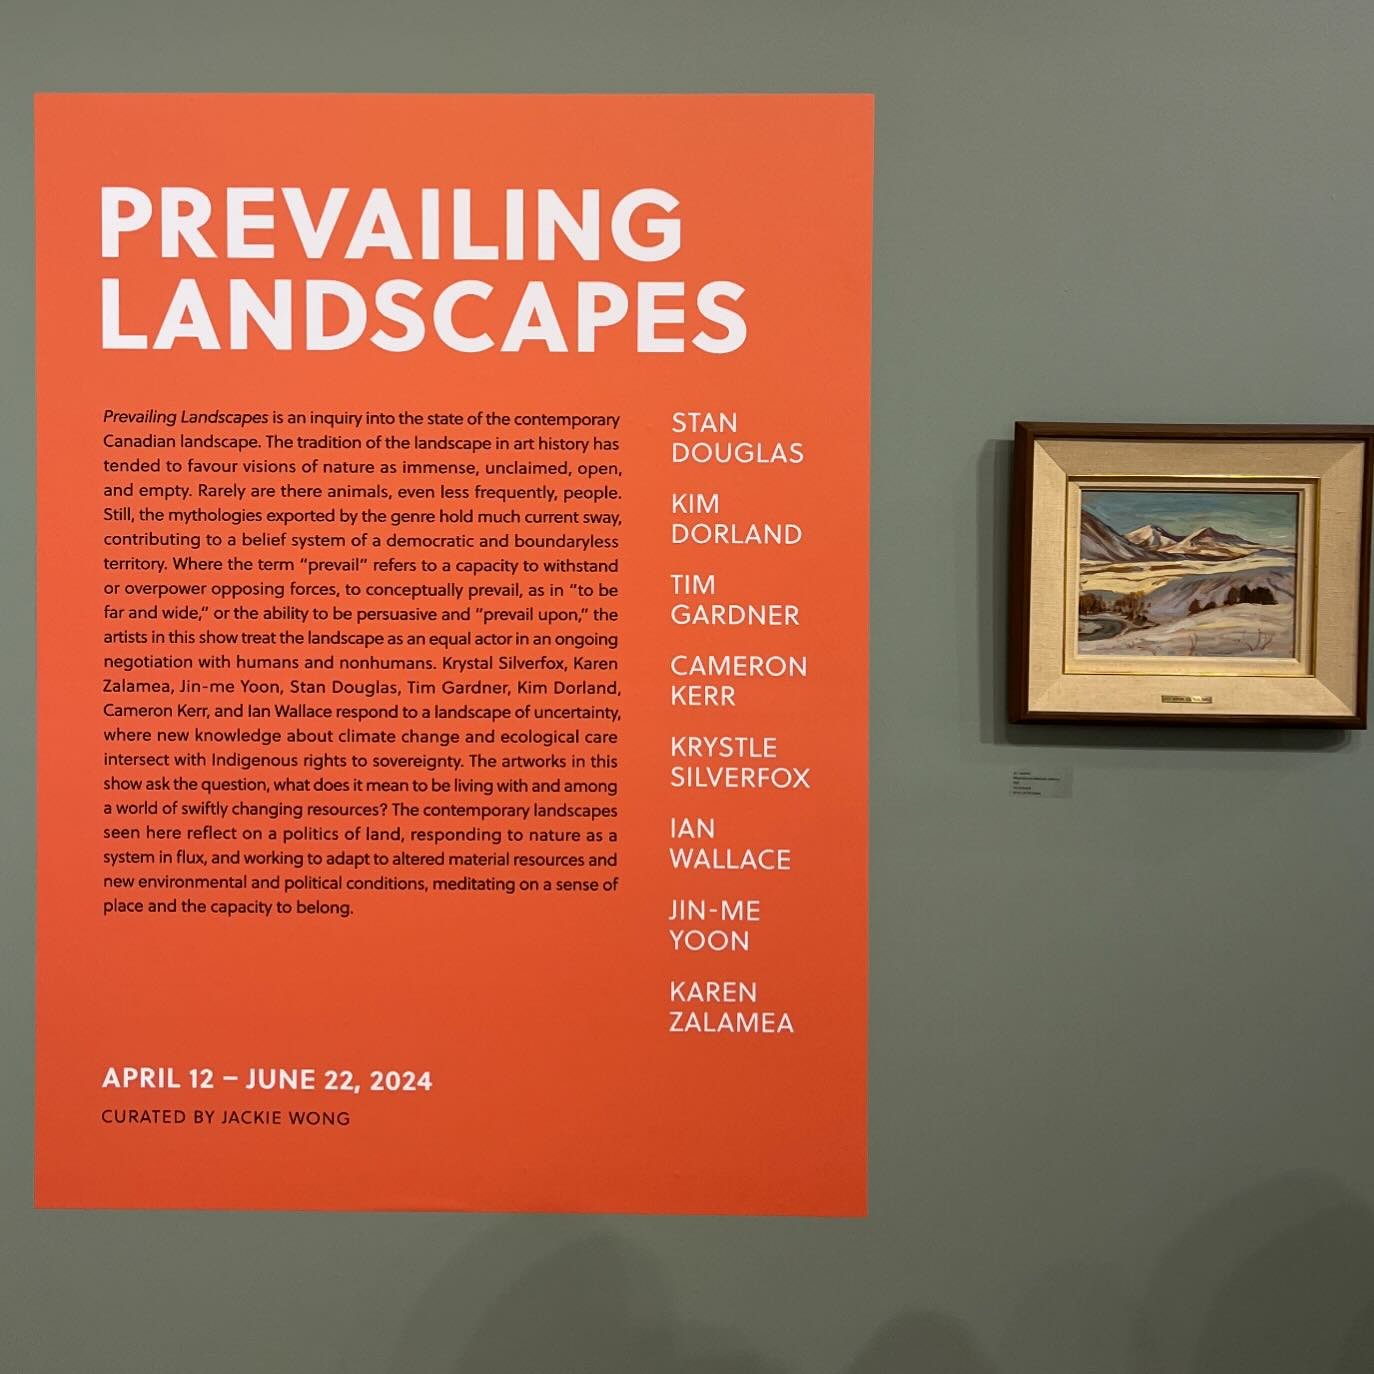 Prevailing Landscapes opened last Friday at @the_smith_foundation, curated by Jackie Wong. Head over to the North Shore (why not?) to view works by @karenzalamea, Krystal Silverfox, Jin-me Yoon, Stan Douglas and more, with a catalogue essay and wall 